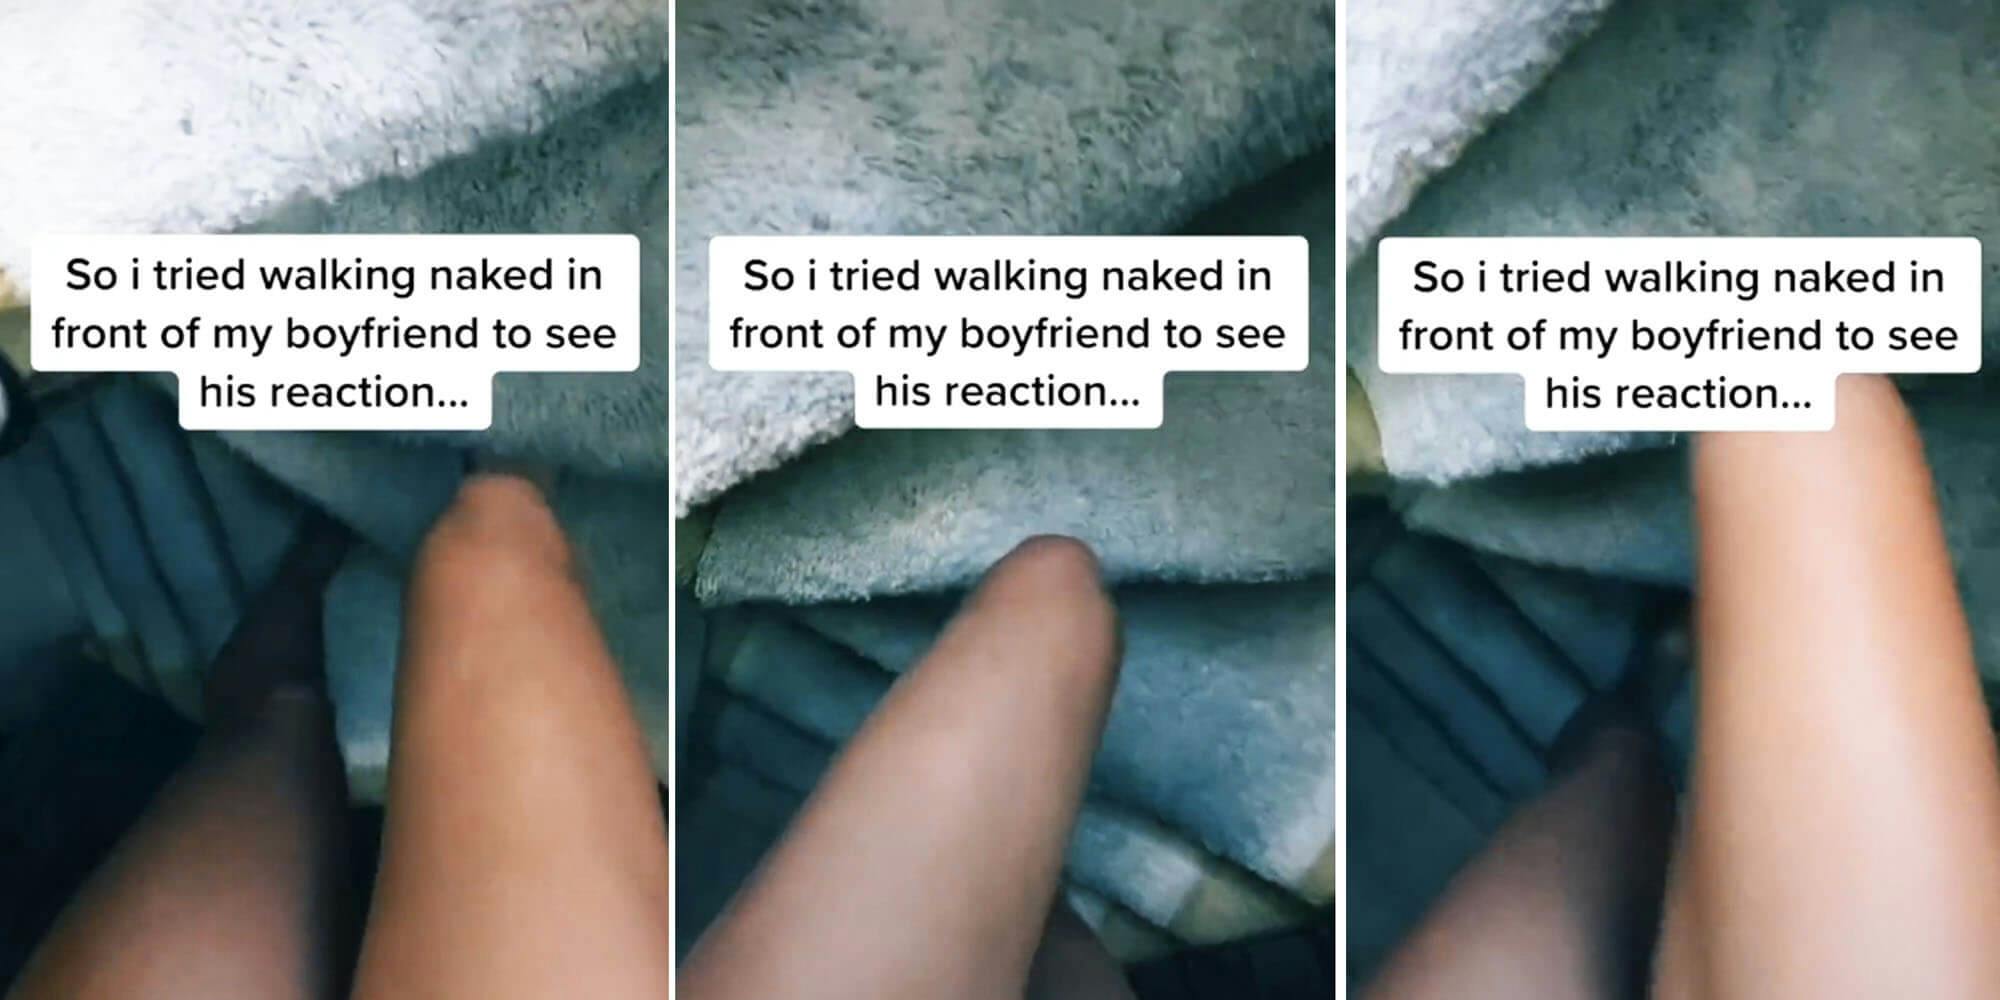 This new ‘walk-in naked’ TikTok challenge has people making embarrassing mistakes